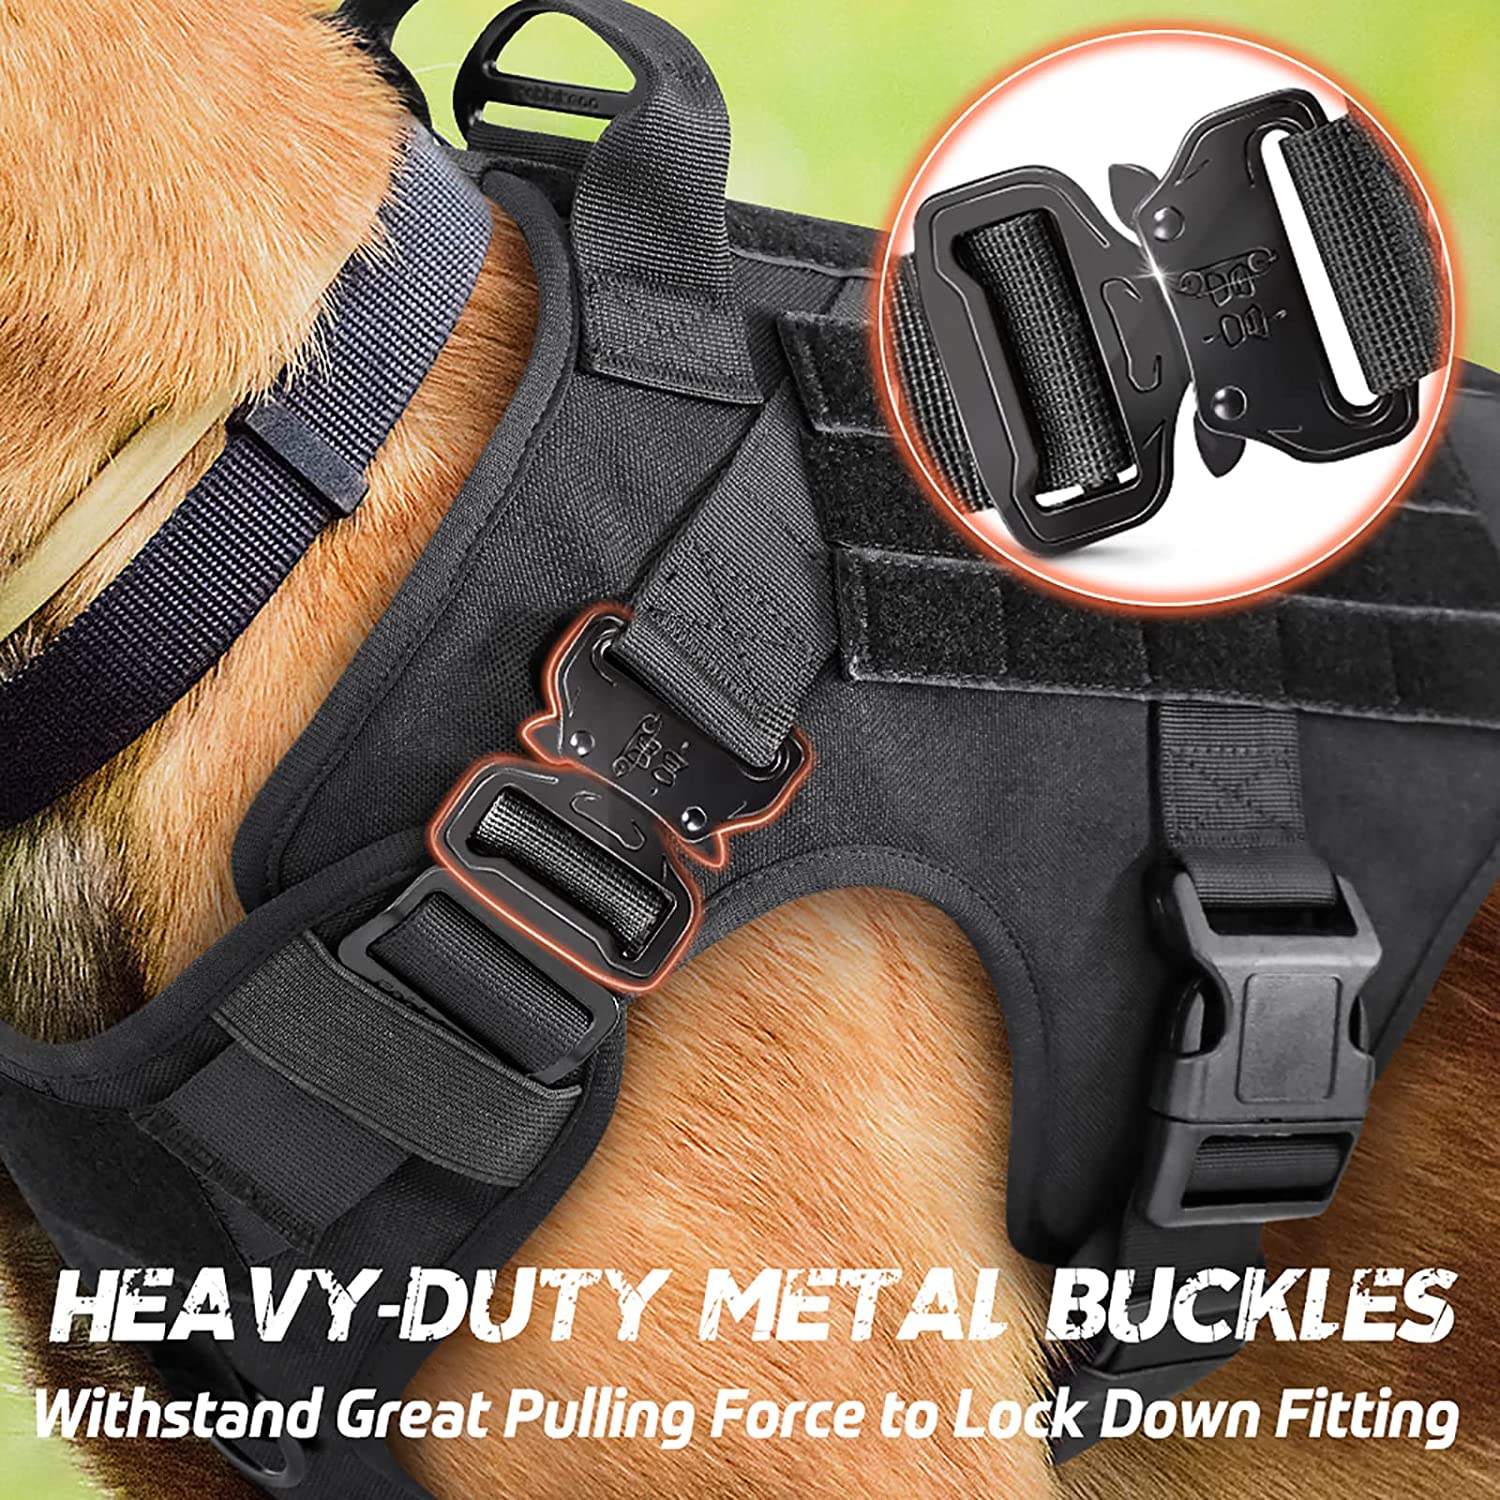 rabbitgoo Dog Harness for Large Dogs, Heavy Duty Dog Harness with Handle, No Pull Dog Vest Large Breed, Adjustable Dog Vest Harness for Walking, Large - image 5 of 9